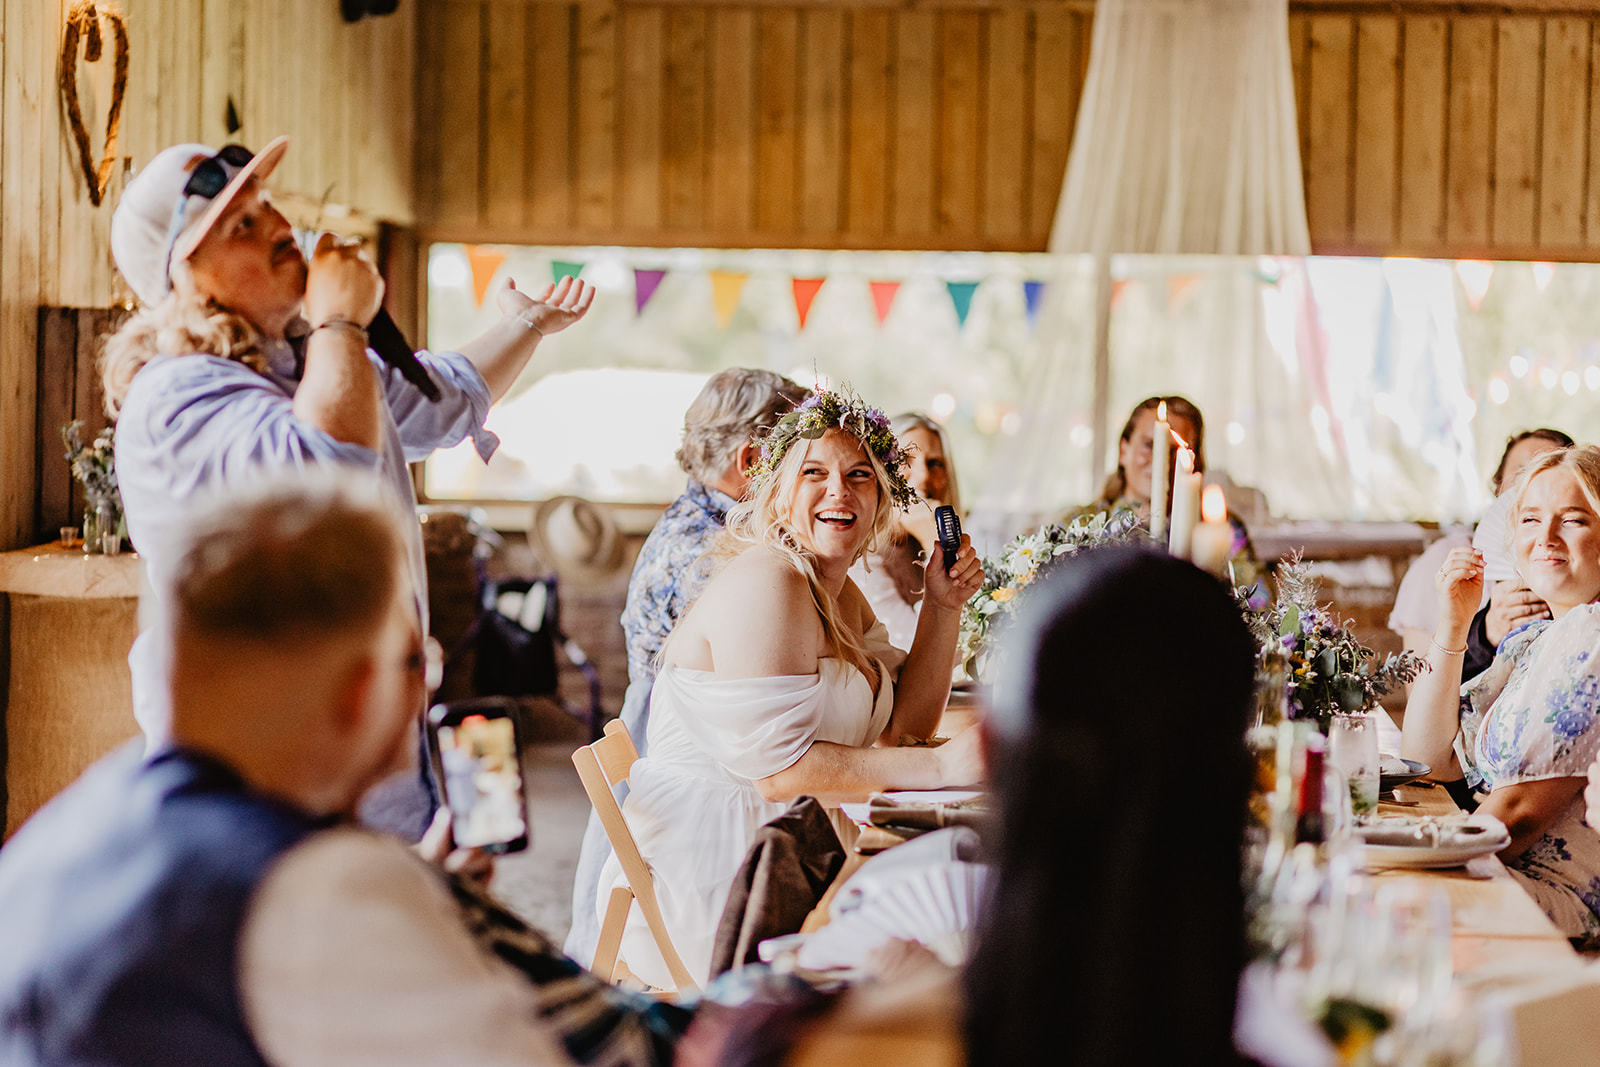 Wedding speeches at a wedding at Mac's Farm in Sussex. By OliveJoy Photography.